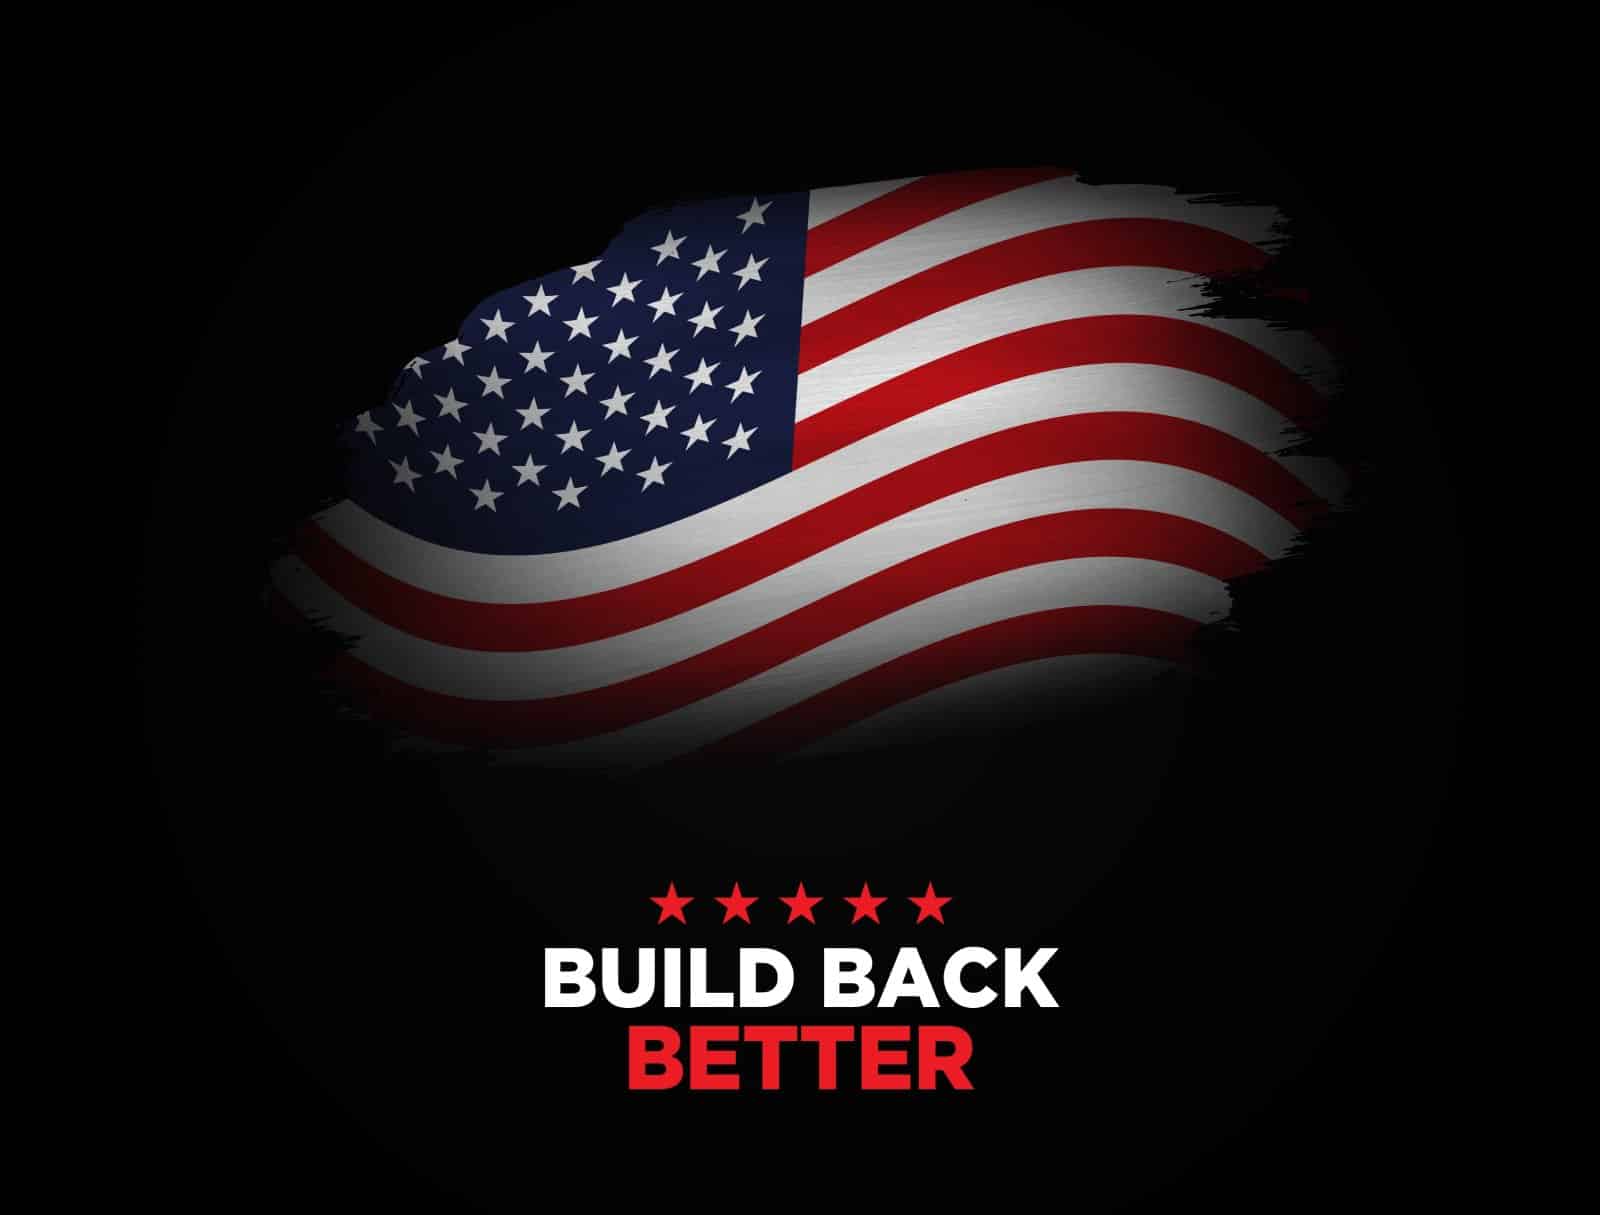 Image Credit: Shutterstock / DOERS <p><span>Used by Joe Biden, this slogan aimed to resonate hope and reconstruction but has often been mocked for its vagueness and perceived lack of tangible progress.</span></p>